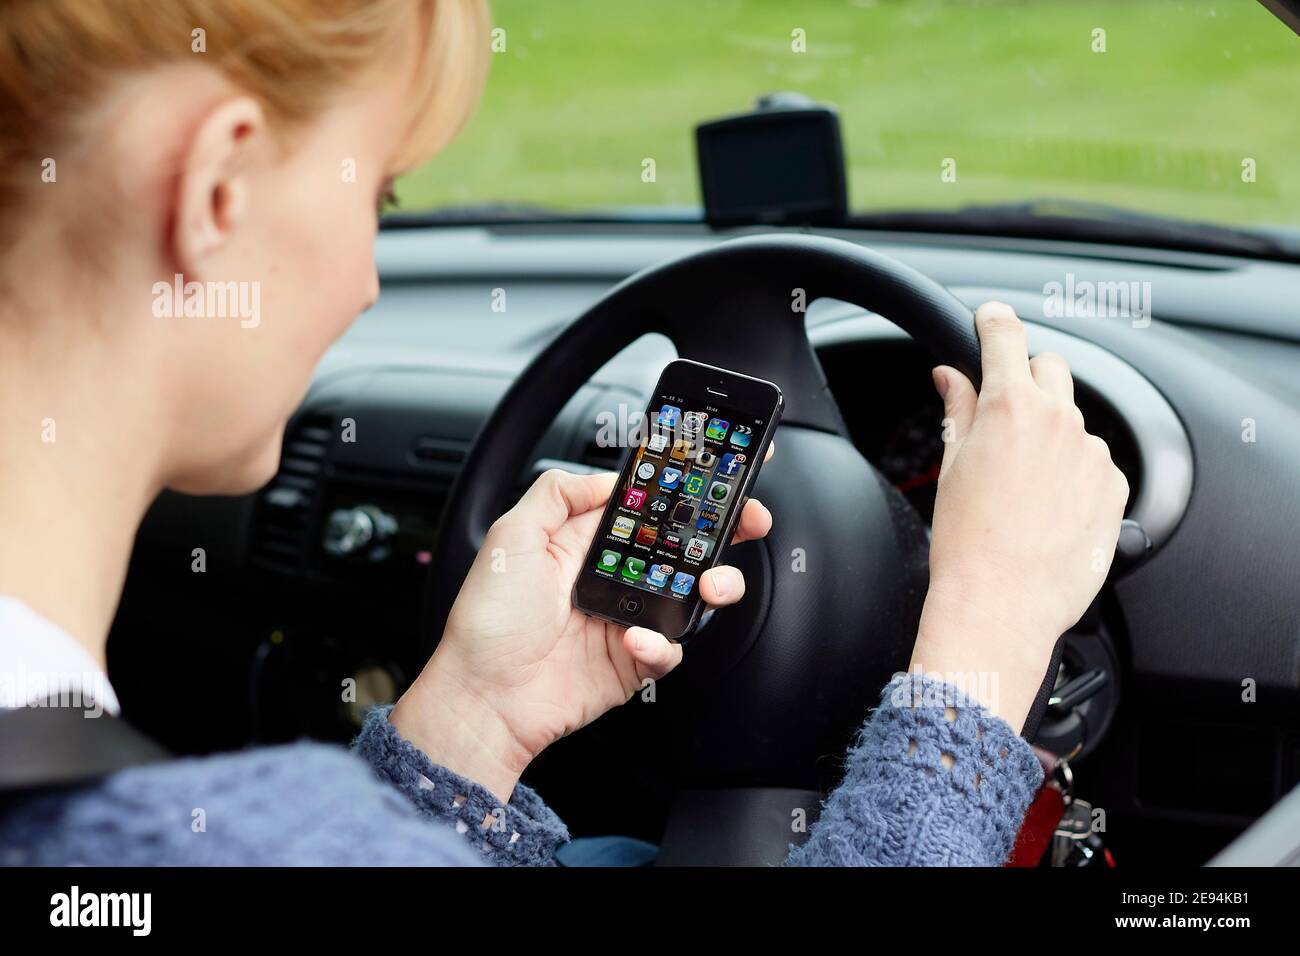 Woman using her phone whilst driving Stock Photo